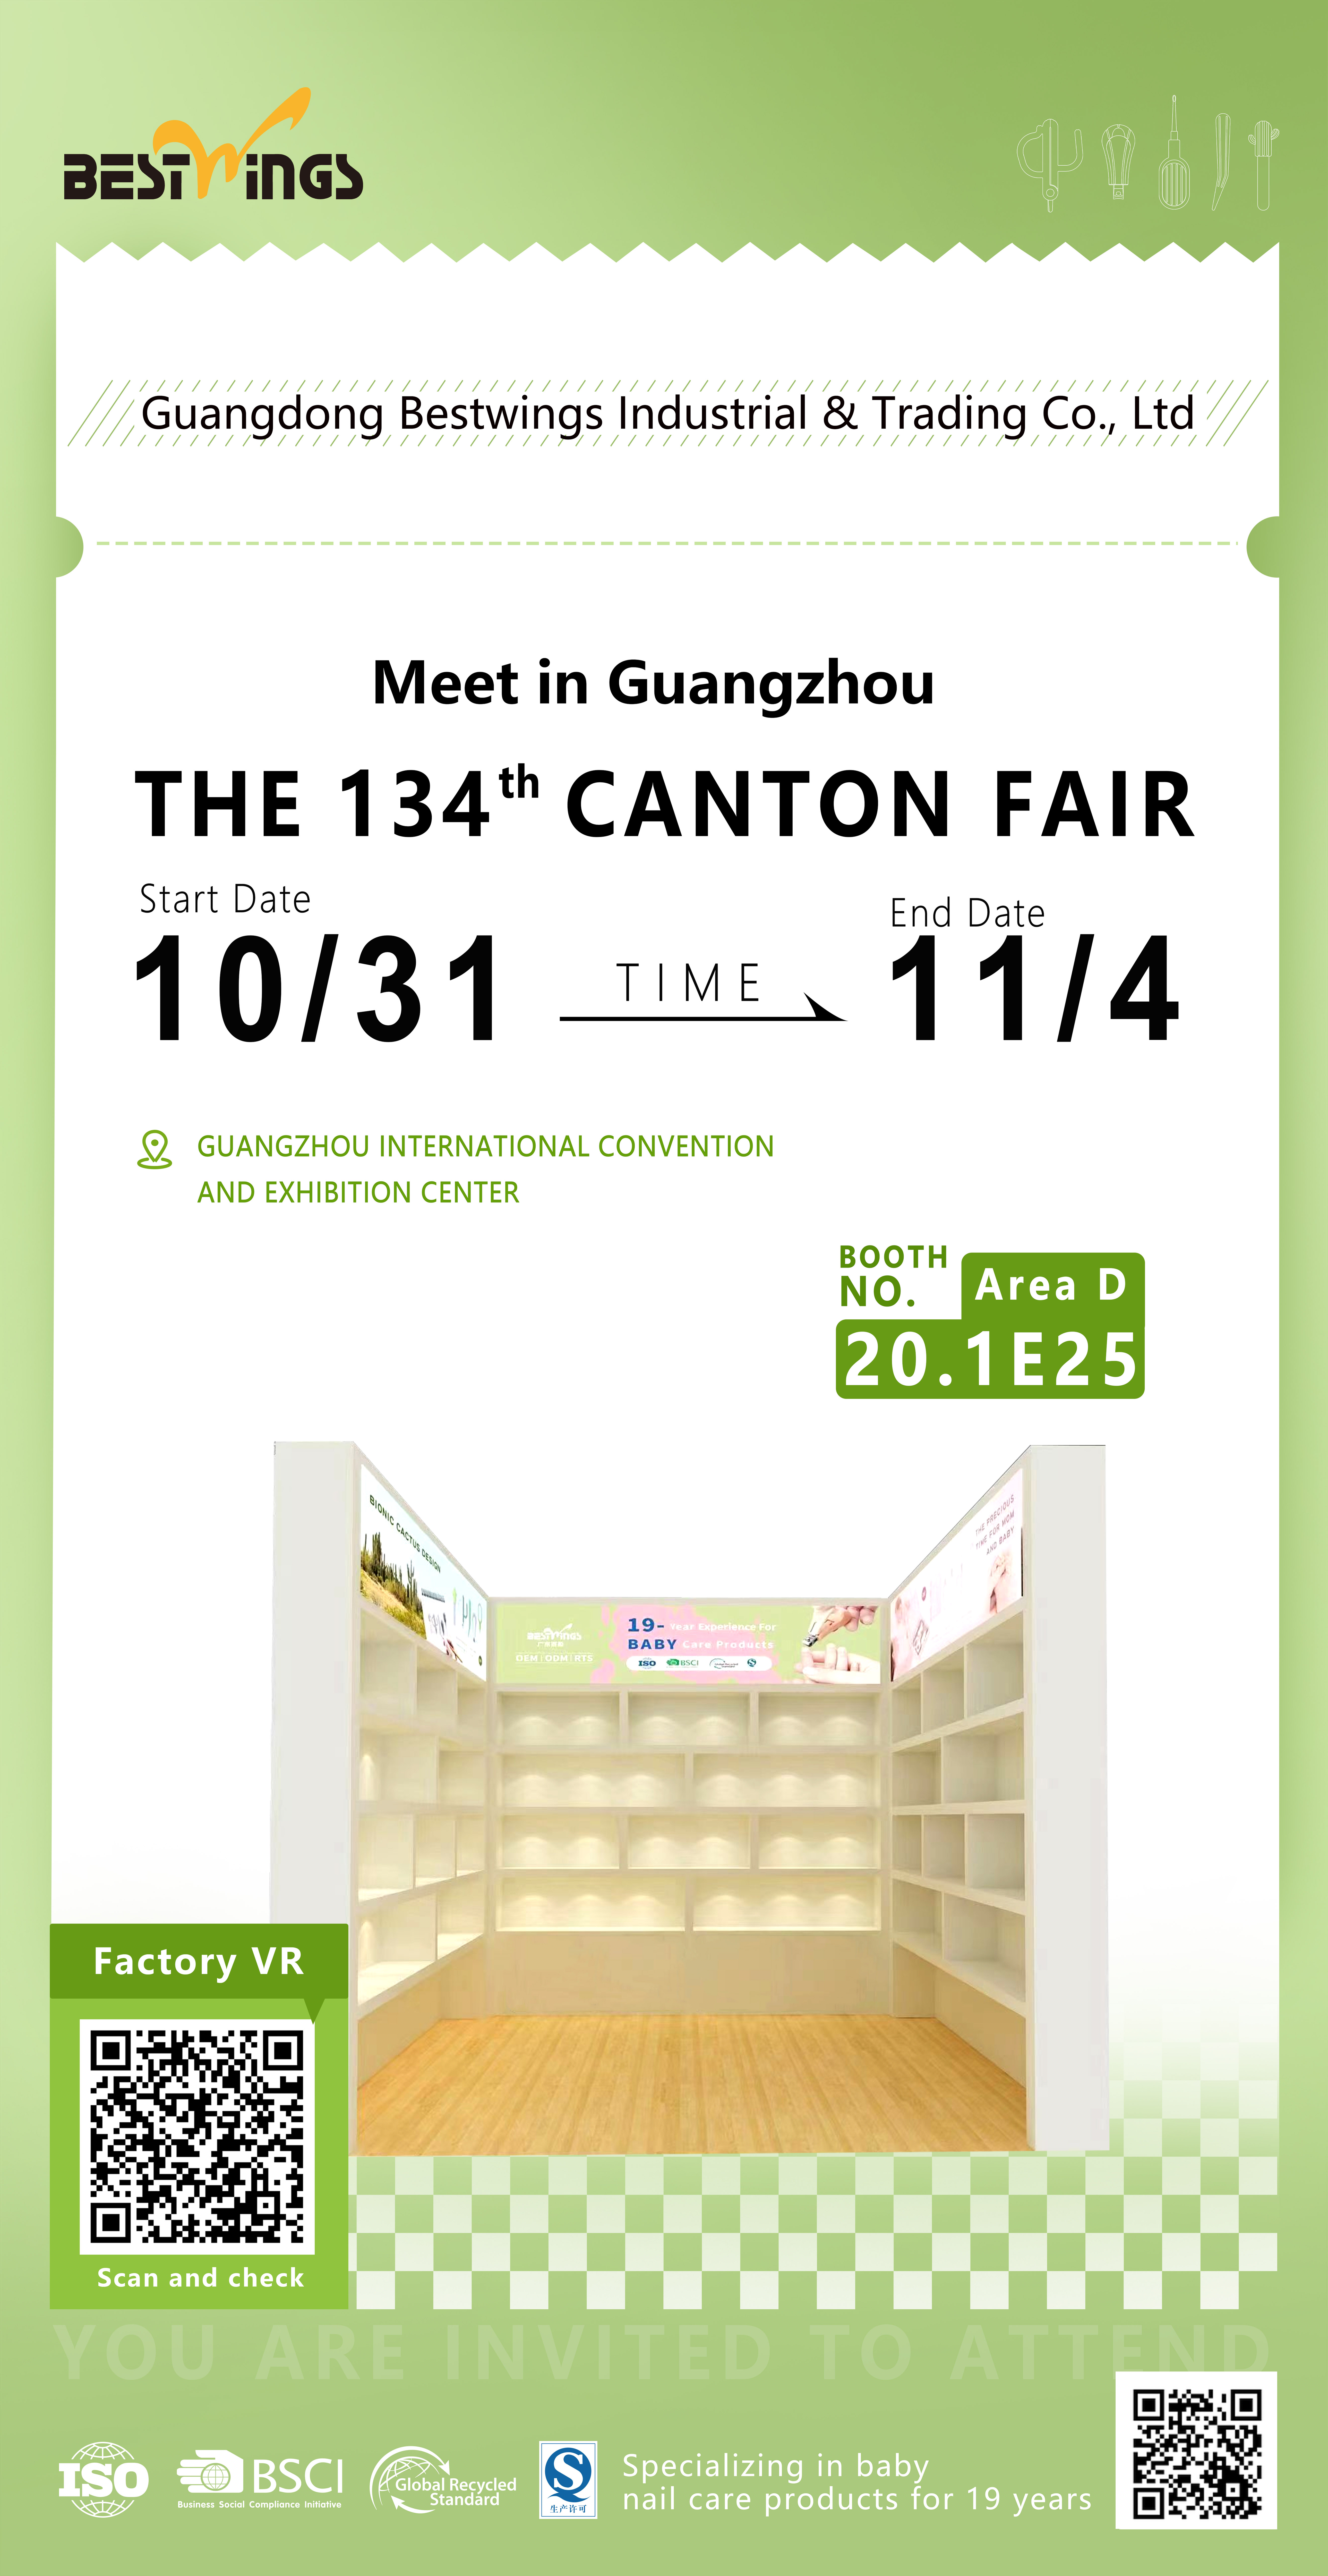 Guangdong Bestwings to Showcase at the 134th Canton Fair, Promising New Arrivals and Exclusive Factory Visits!